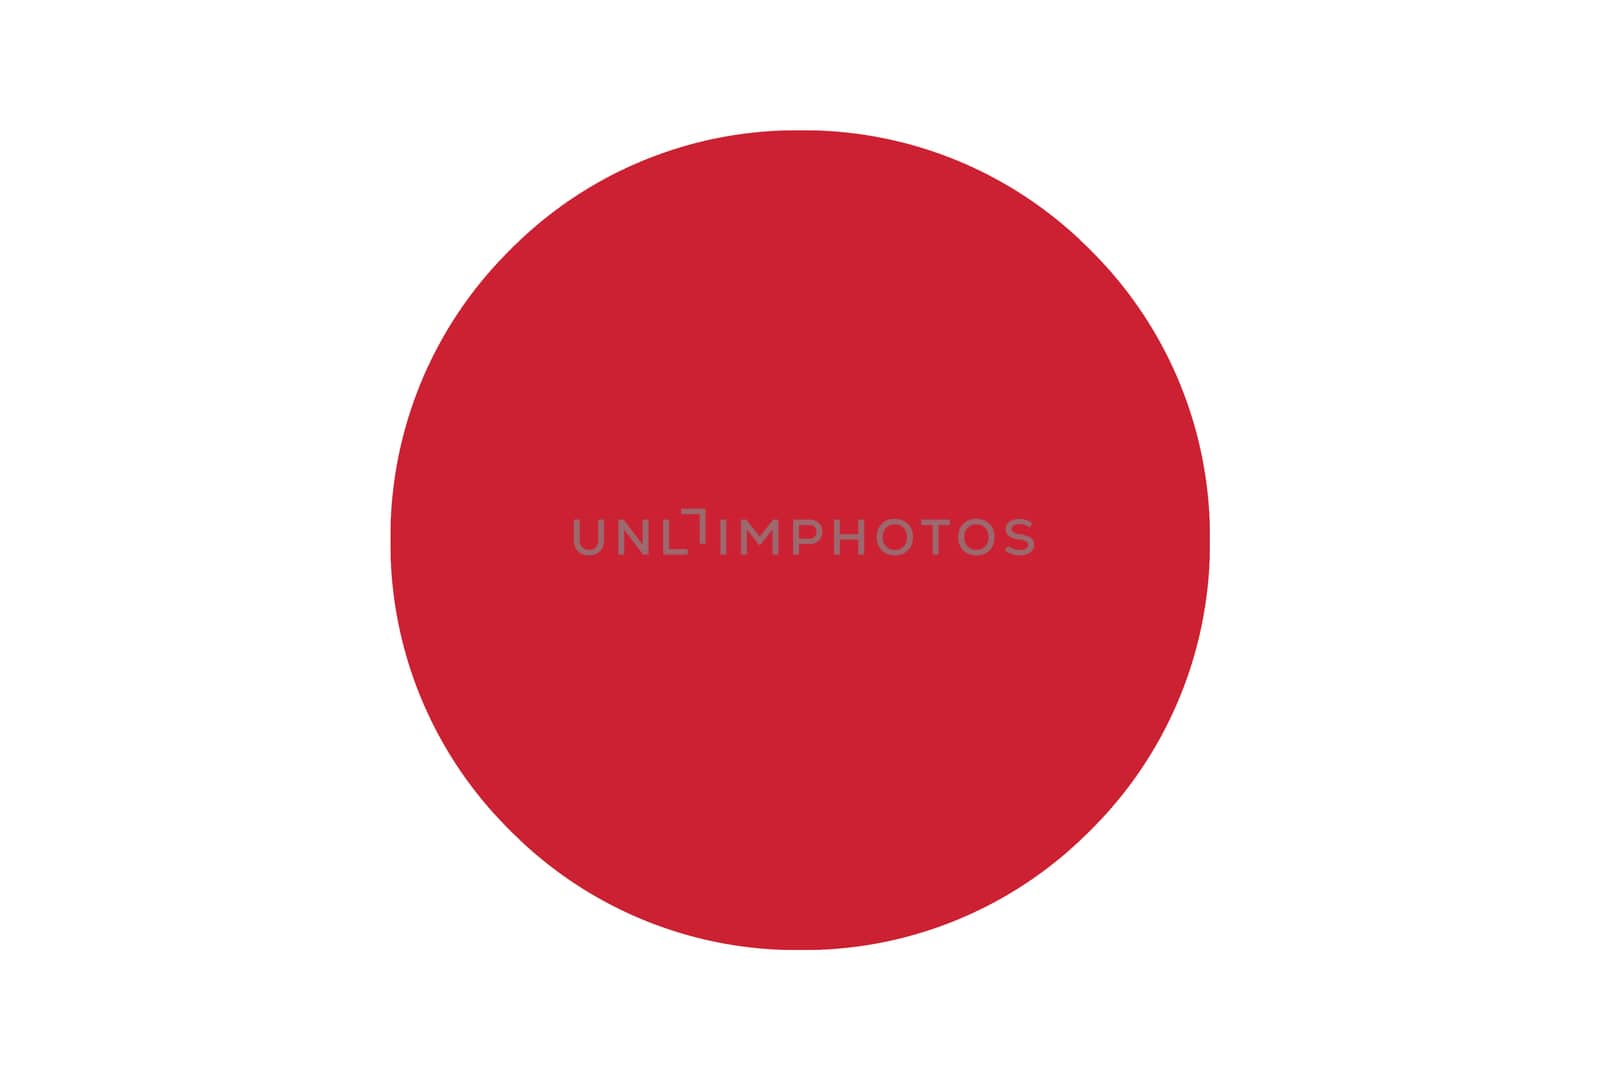 National flag of Japan which is a crimson red disc on a white background which represents the sun